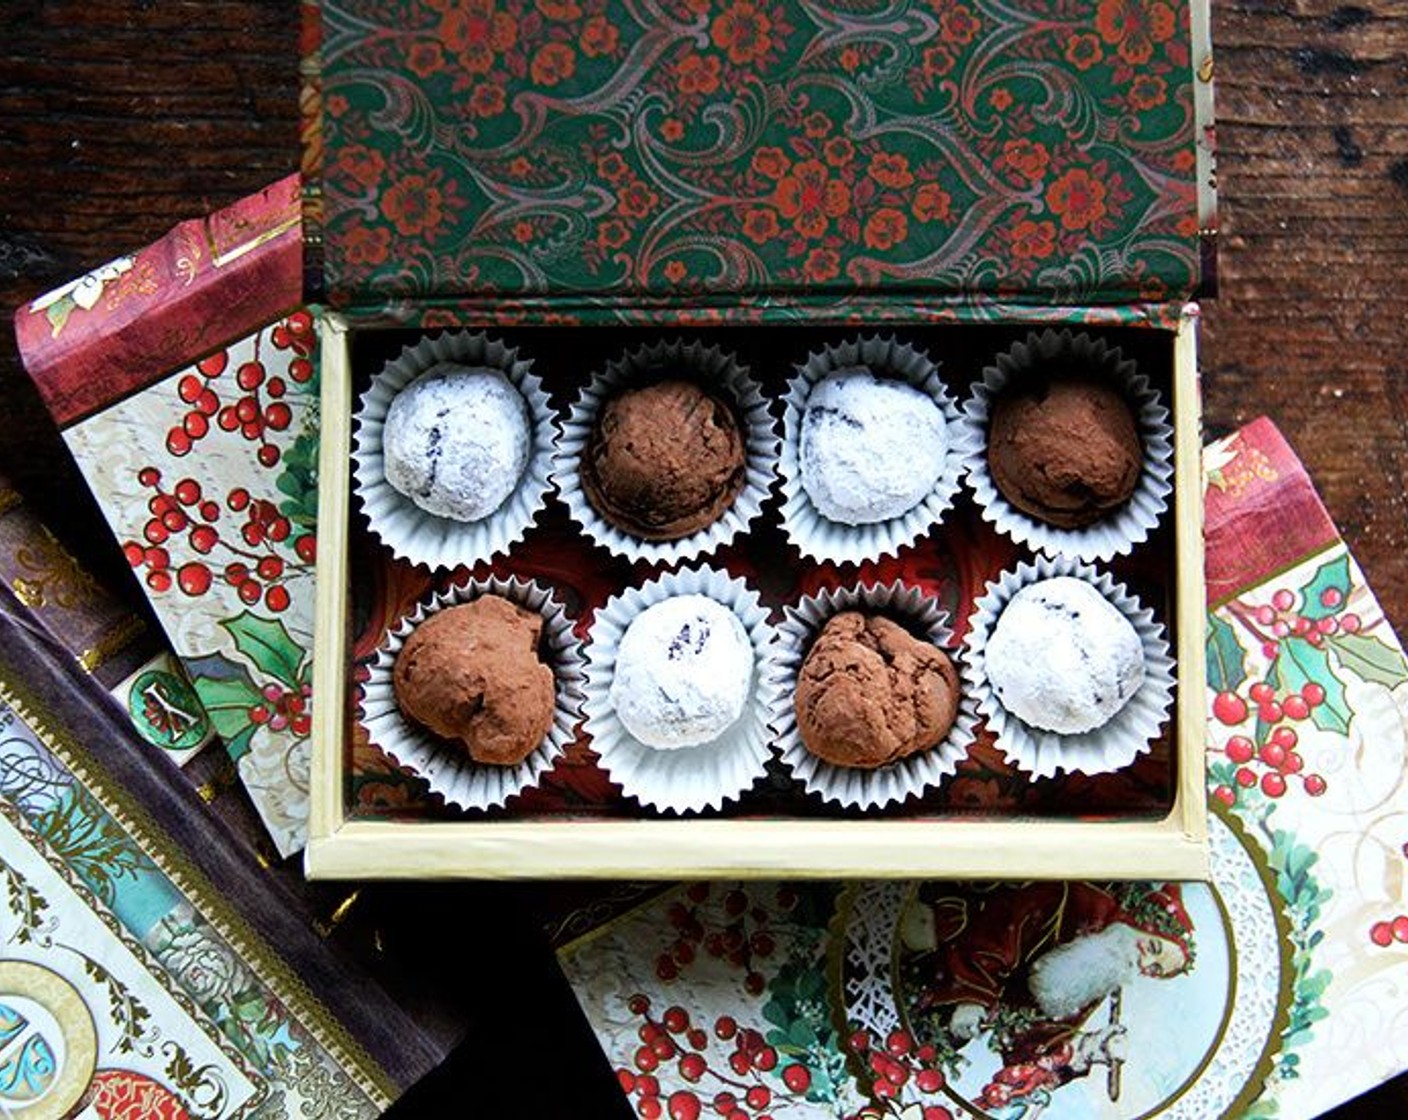 step 6 Store truffles in fridge or a cool part of your house. Let come to room temperature at least an hour before serving. Enjoy!